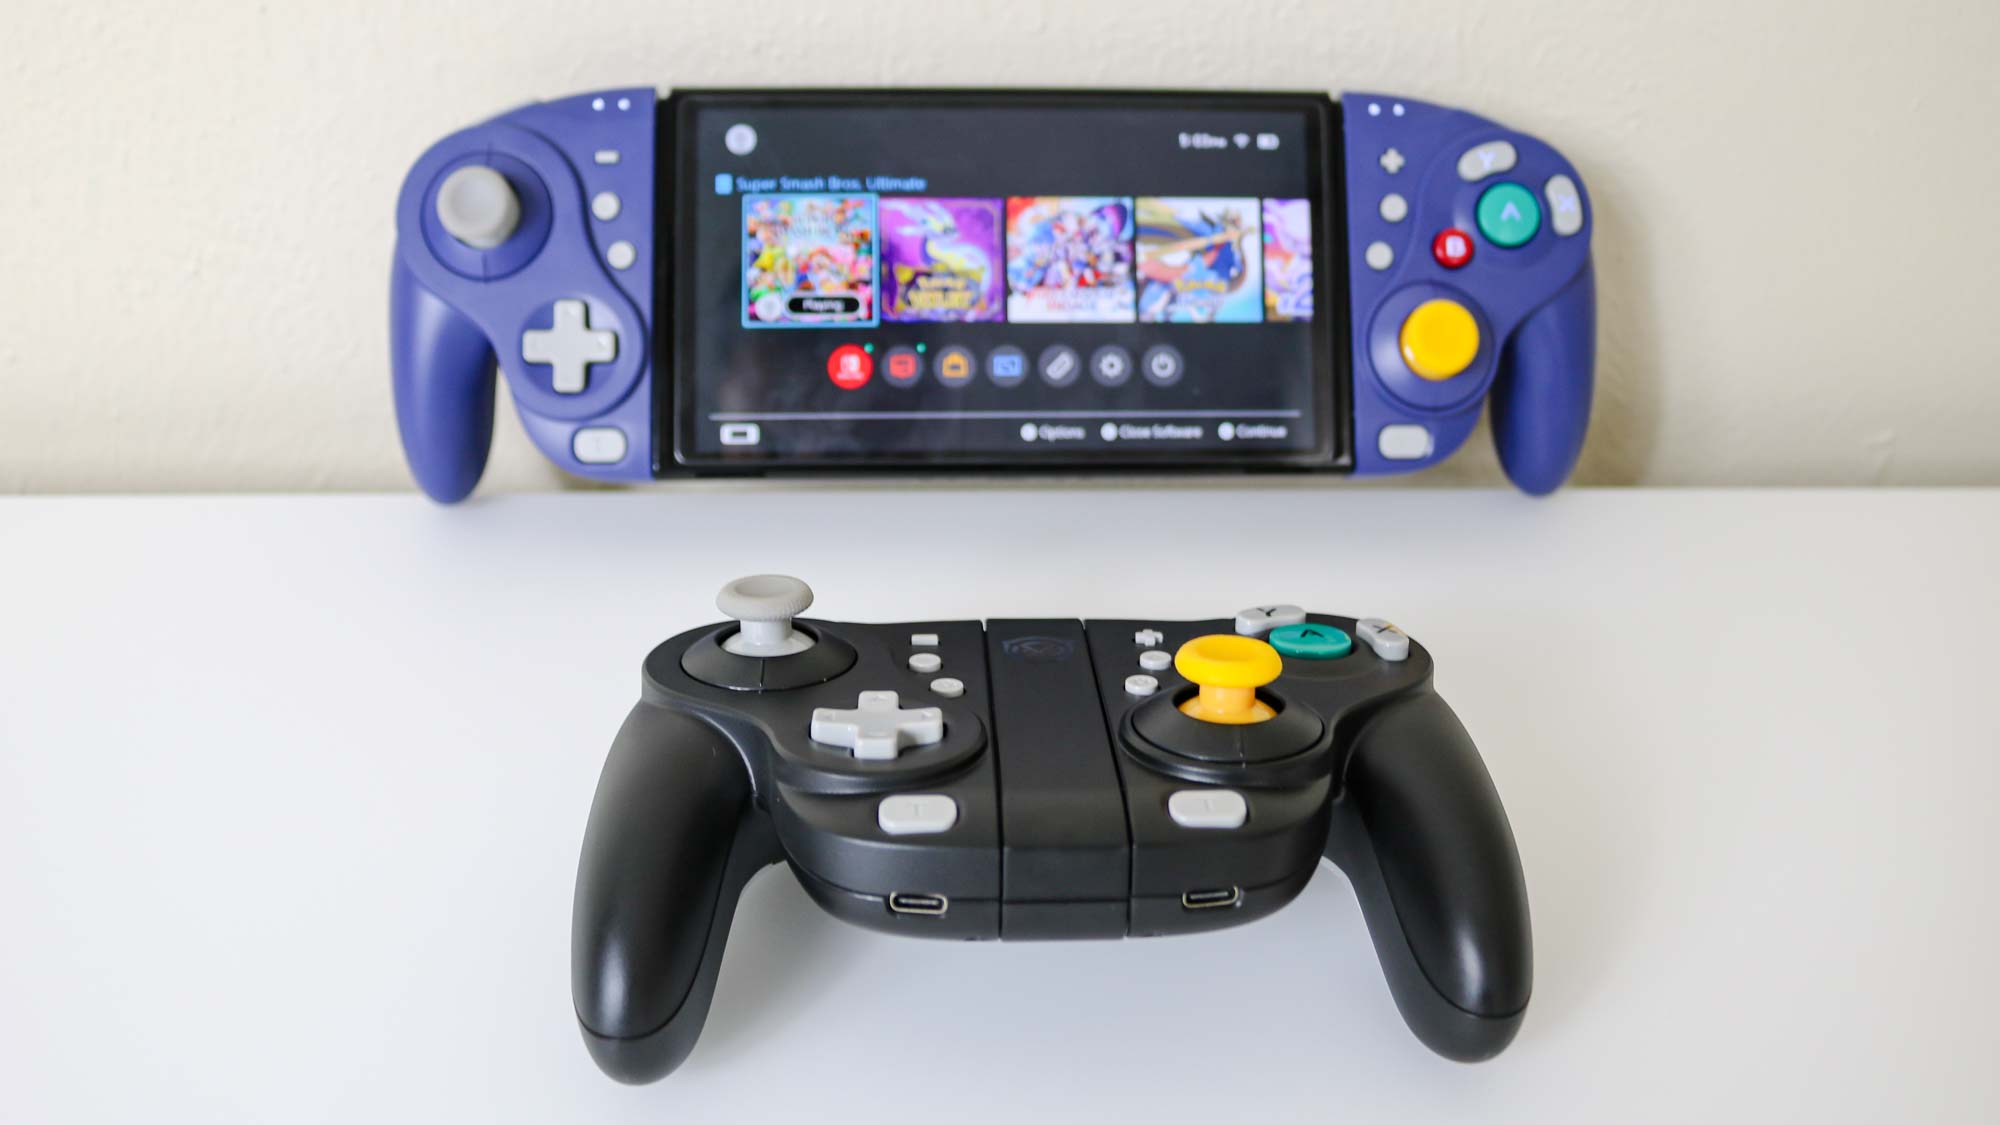 NYXI Wizard Wireless Controller for Nintendo Switch - Purple for sale  online